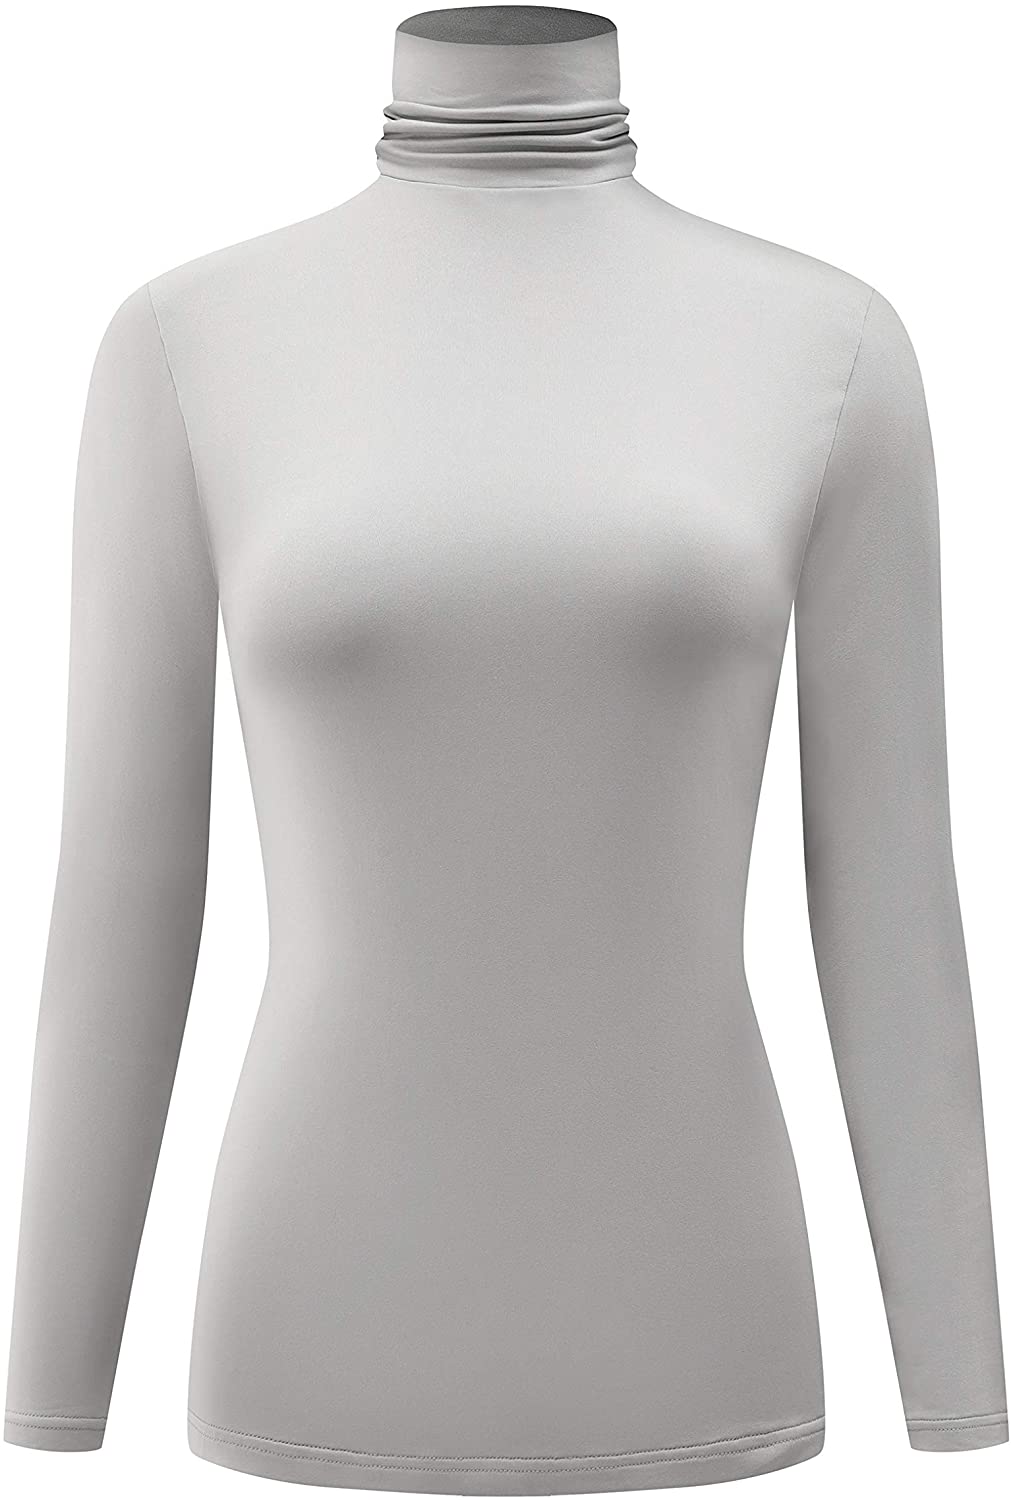 KLOTHO Casual Turtleneck Tops Lightweight Long Sleeve Soft Thermal Shirts for Women